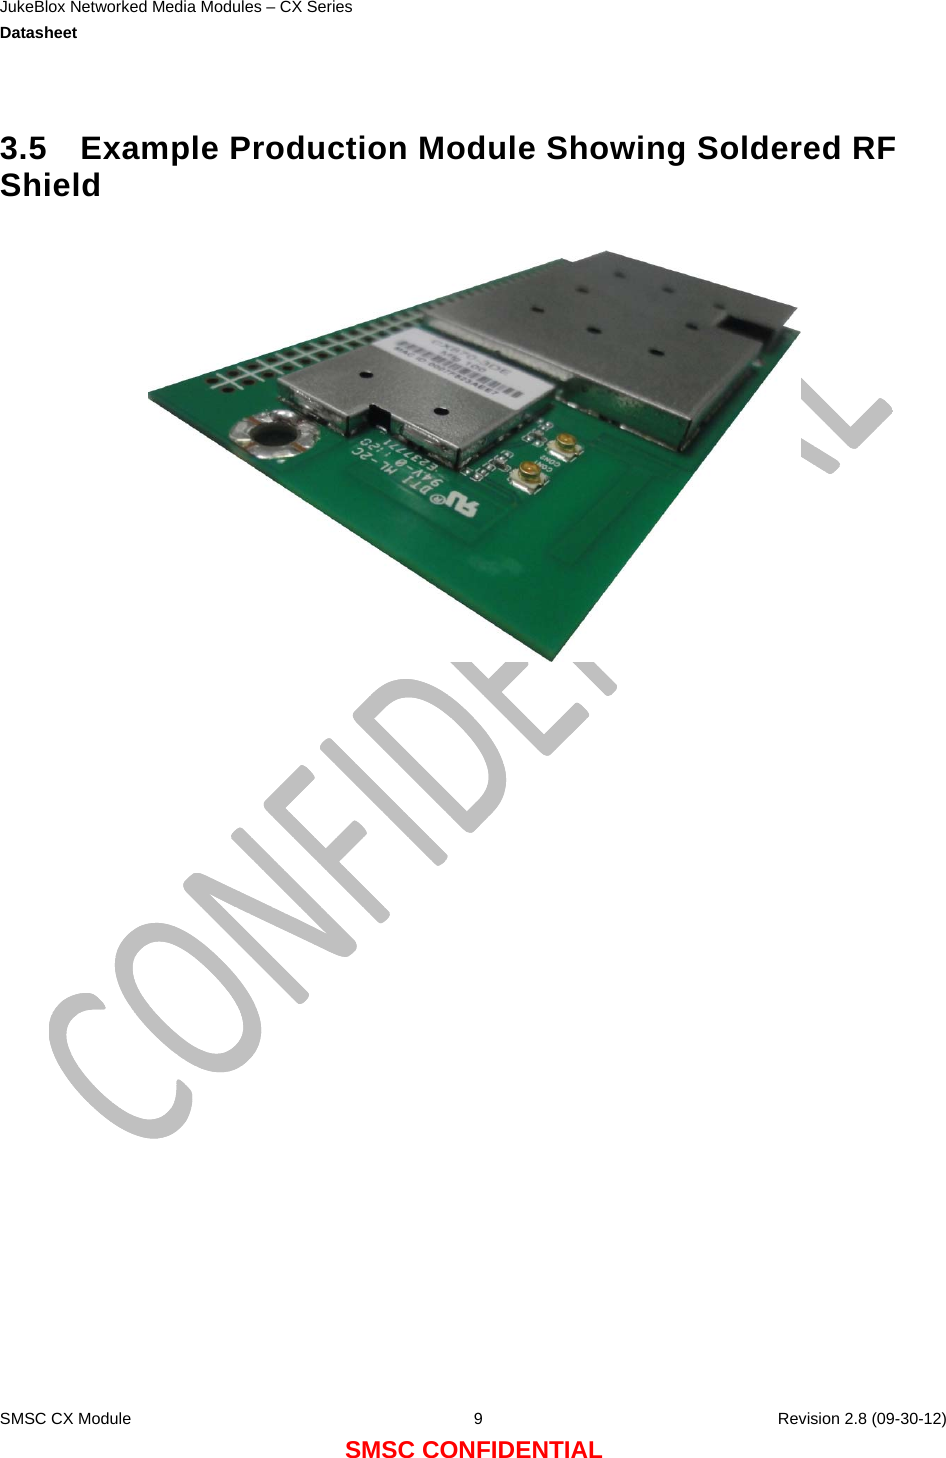 JukeBlox Networked Media Modules – CX Series  Datasheet    SMSC CX Module  9    Revision 2.8 (09-30-12) SMSC CONFIDENTIAL  3.5 Example Production Module Showing Soldered RF Shield    